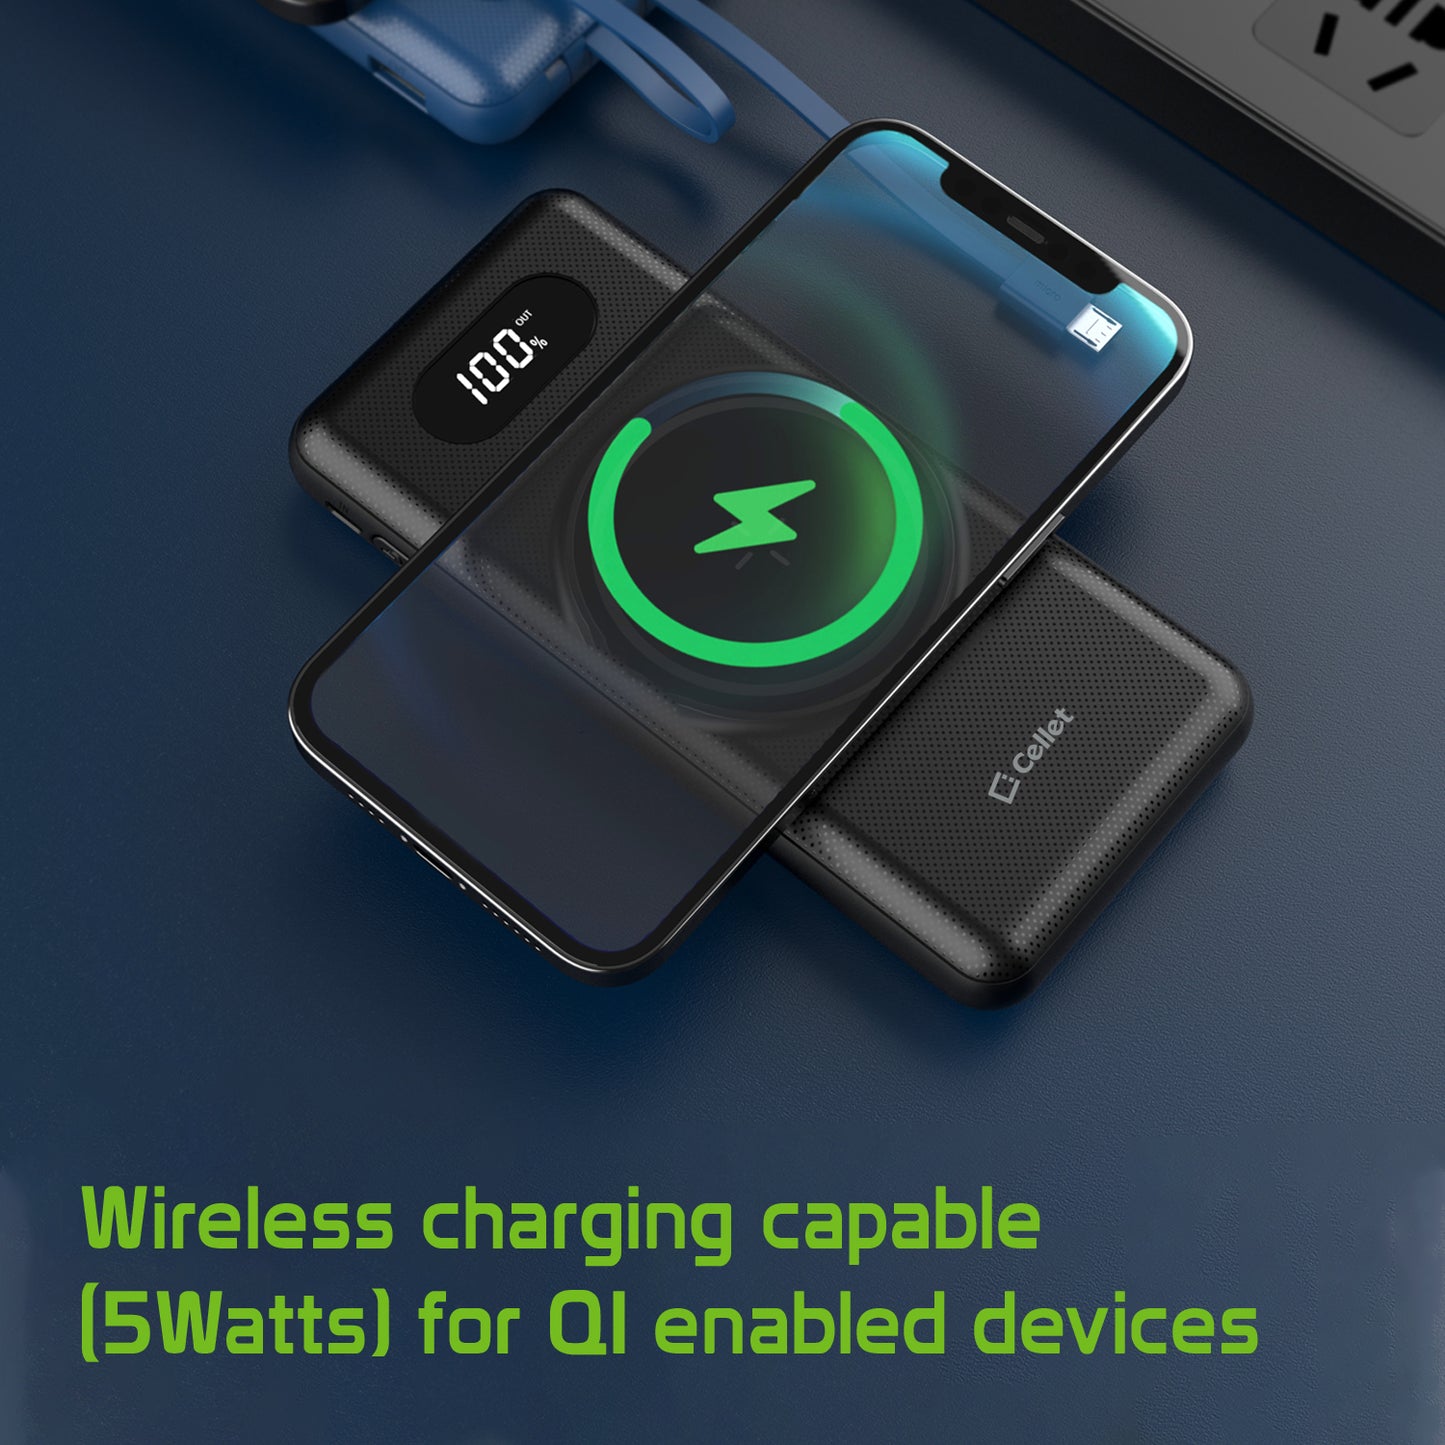 QIMS1000 - Wireless QI Portable Power Bank Charger, Wireless Charging Pad, Digital Display and Built in Lightning, USB-C and Micro USB Cable 10000mAh